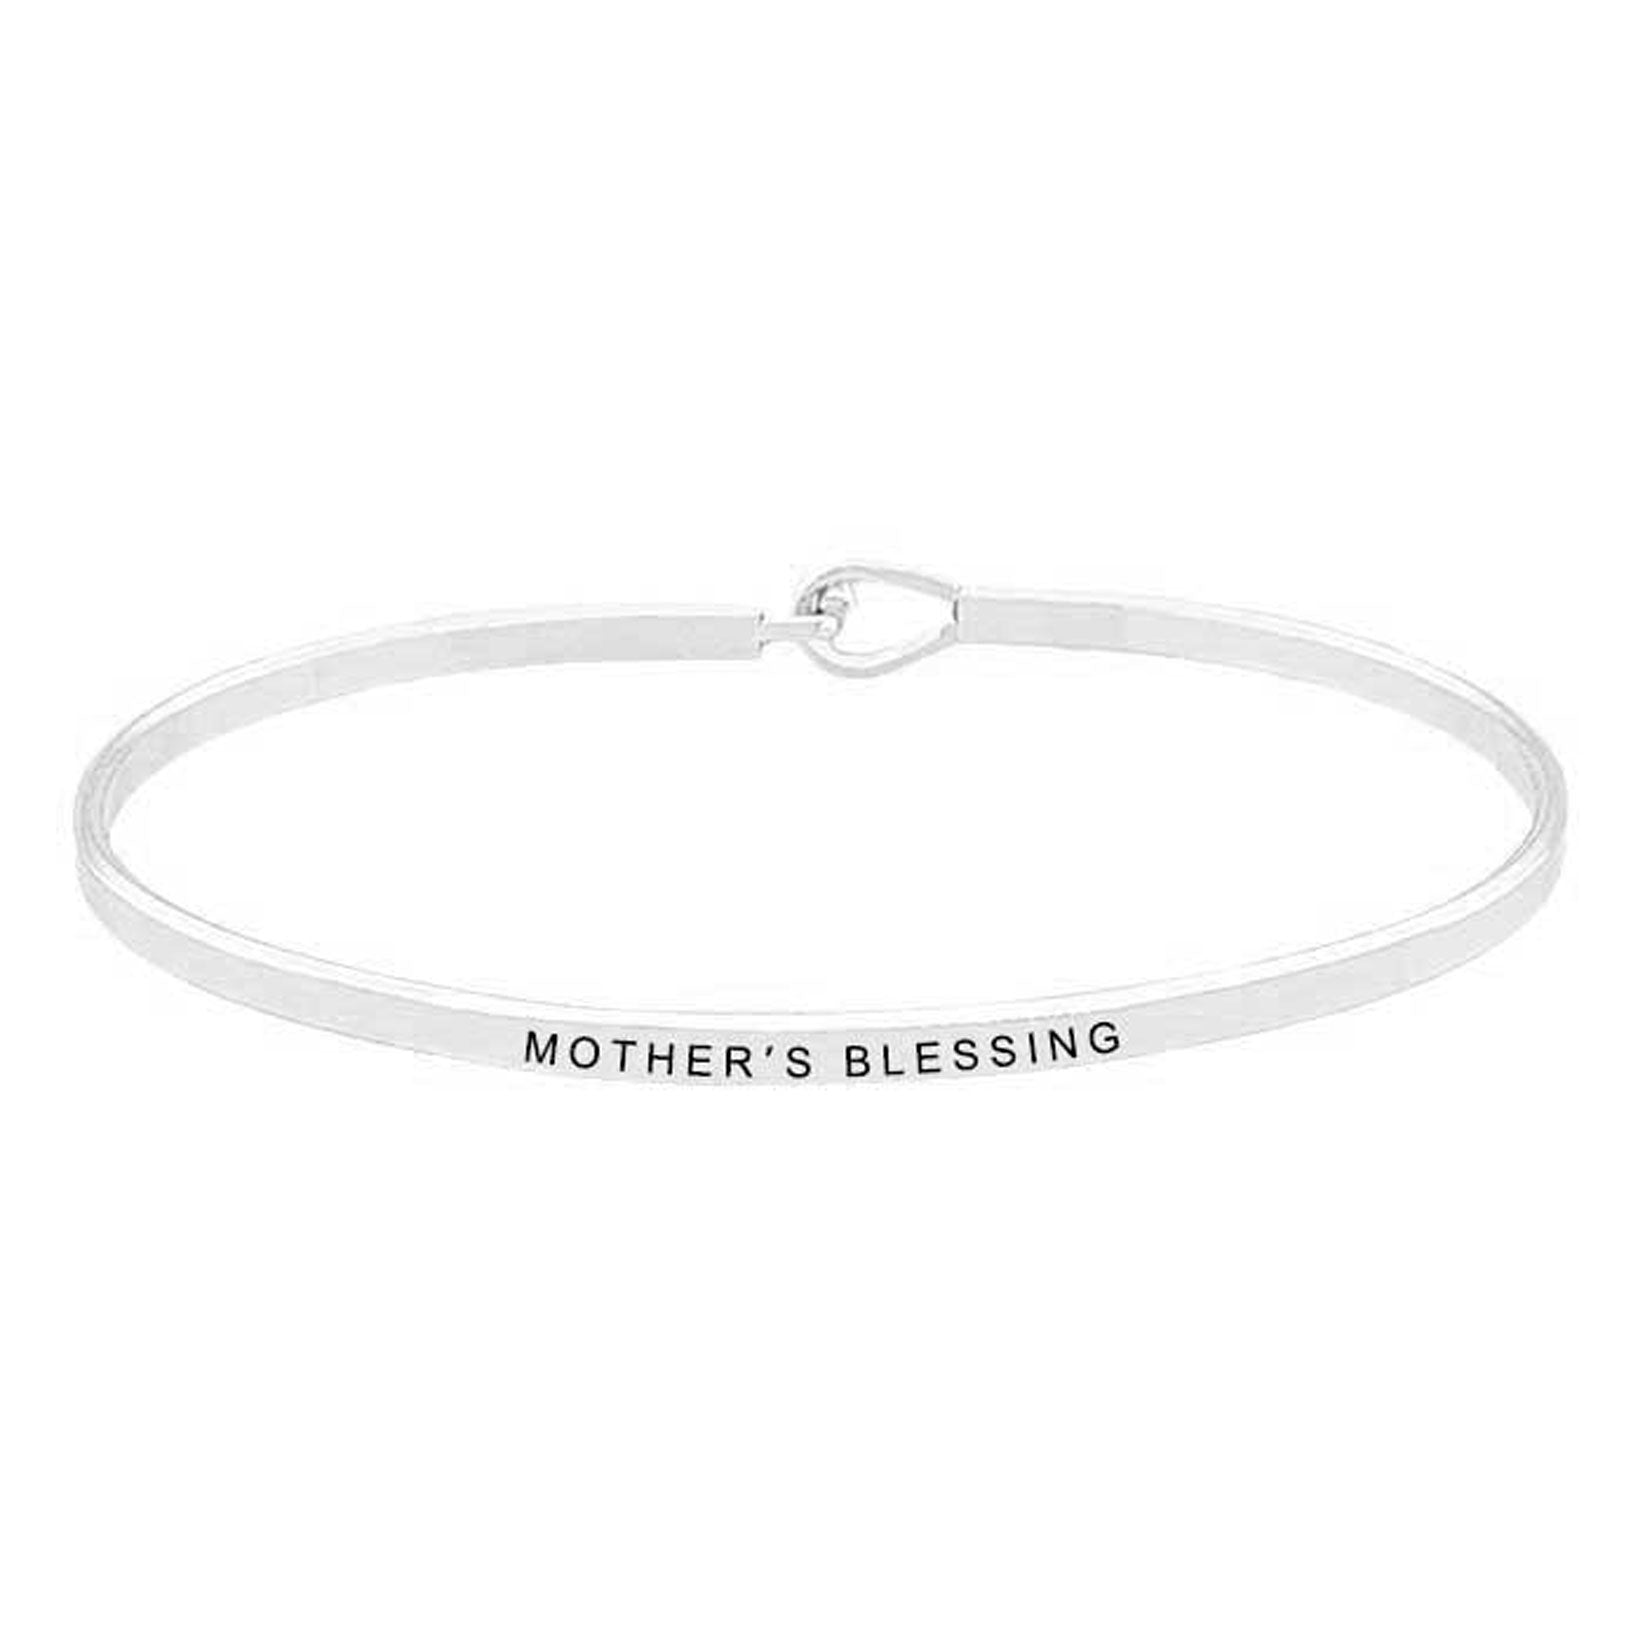 Rhodium Mother's Blessing Brass Thin Metal Hook Bracelet, These metal circle hook bracelets are easy to put on, take off and so comfortable for daily wear. Pair with a tee and jeans to dress up your laid-back look, or add to a shift dress and pumps to enhance your work-ready ensemble. Makes a great gift for any occasion.